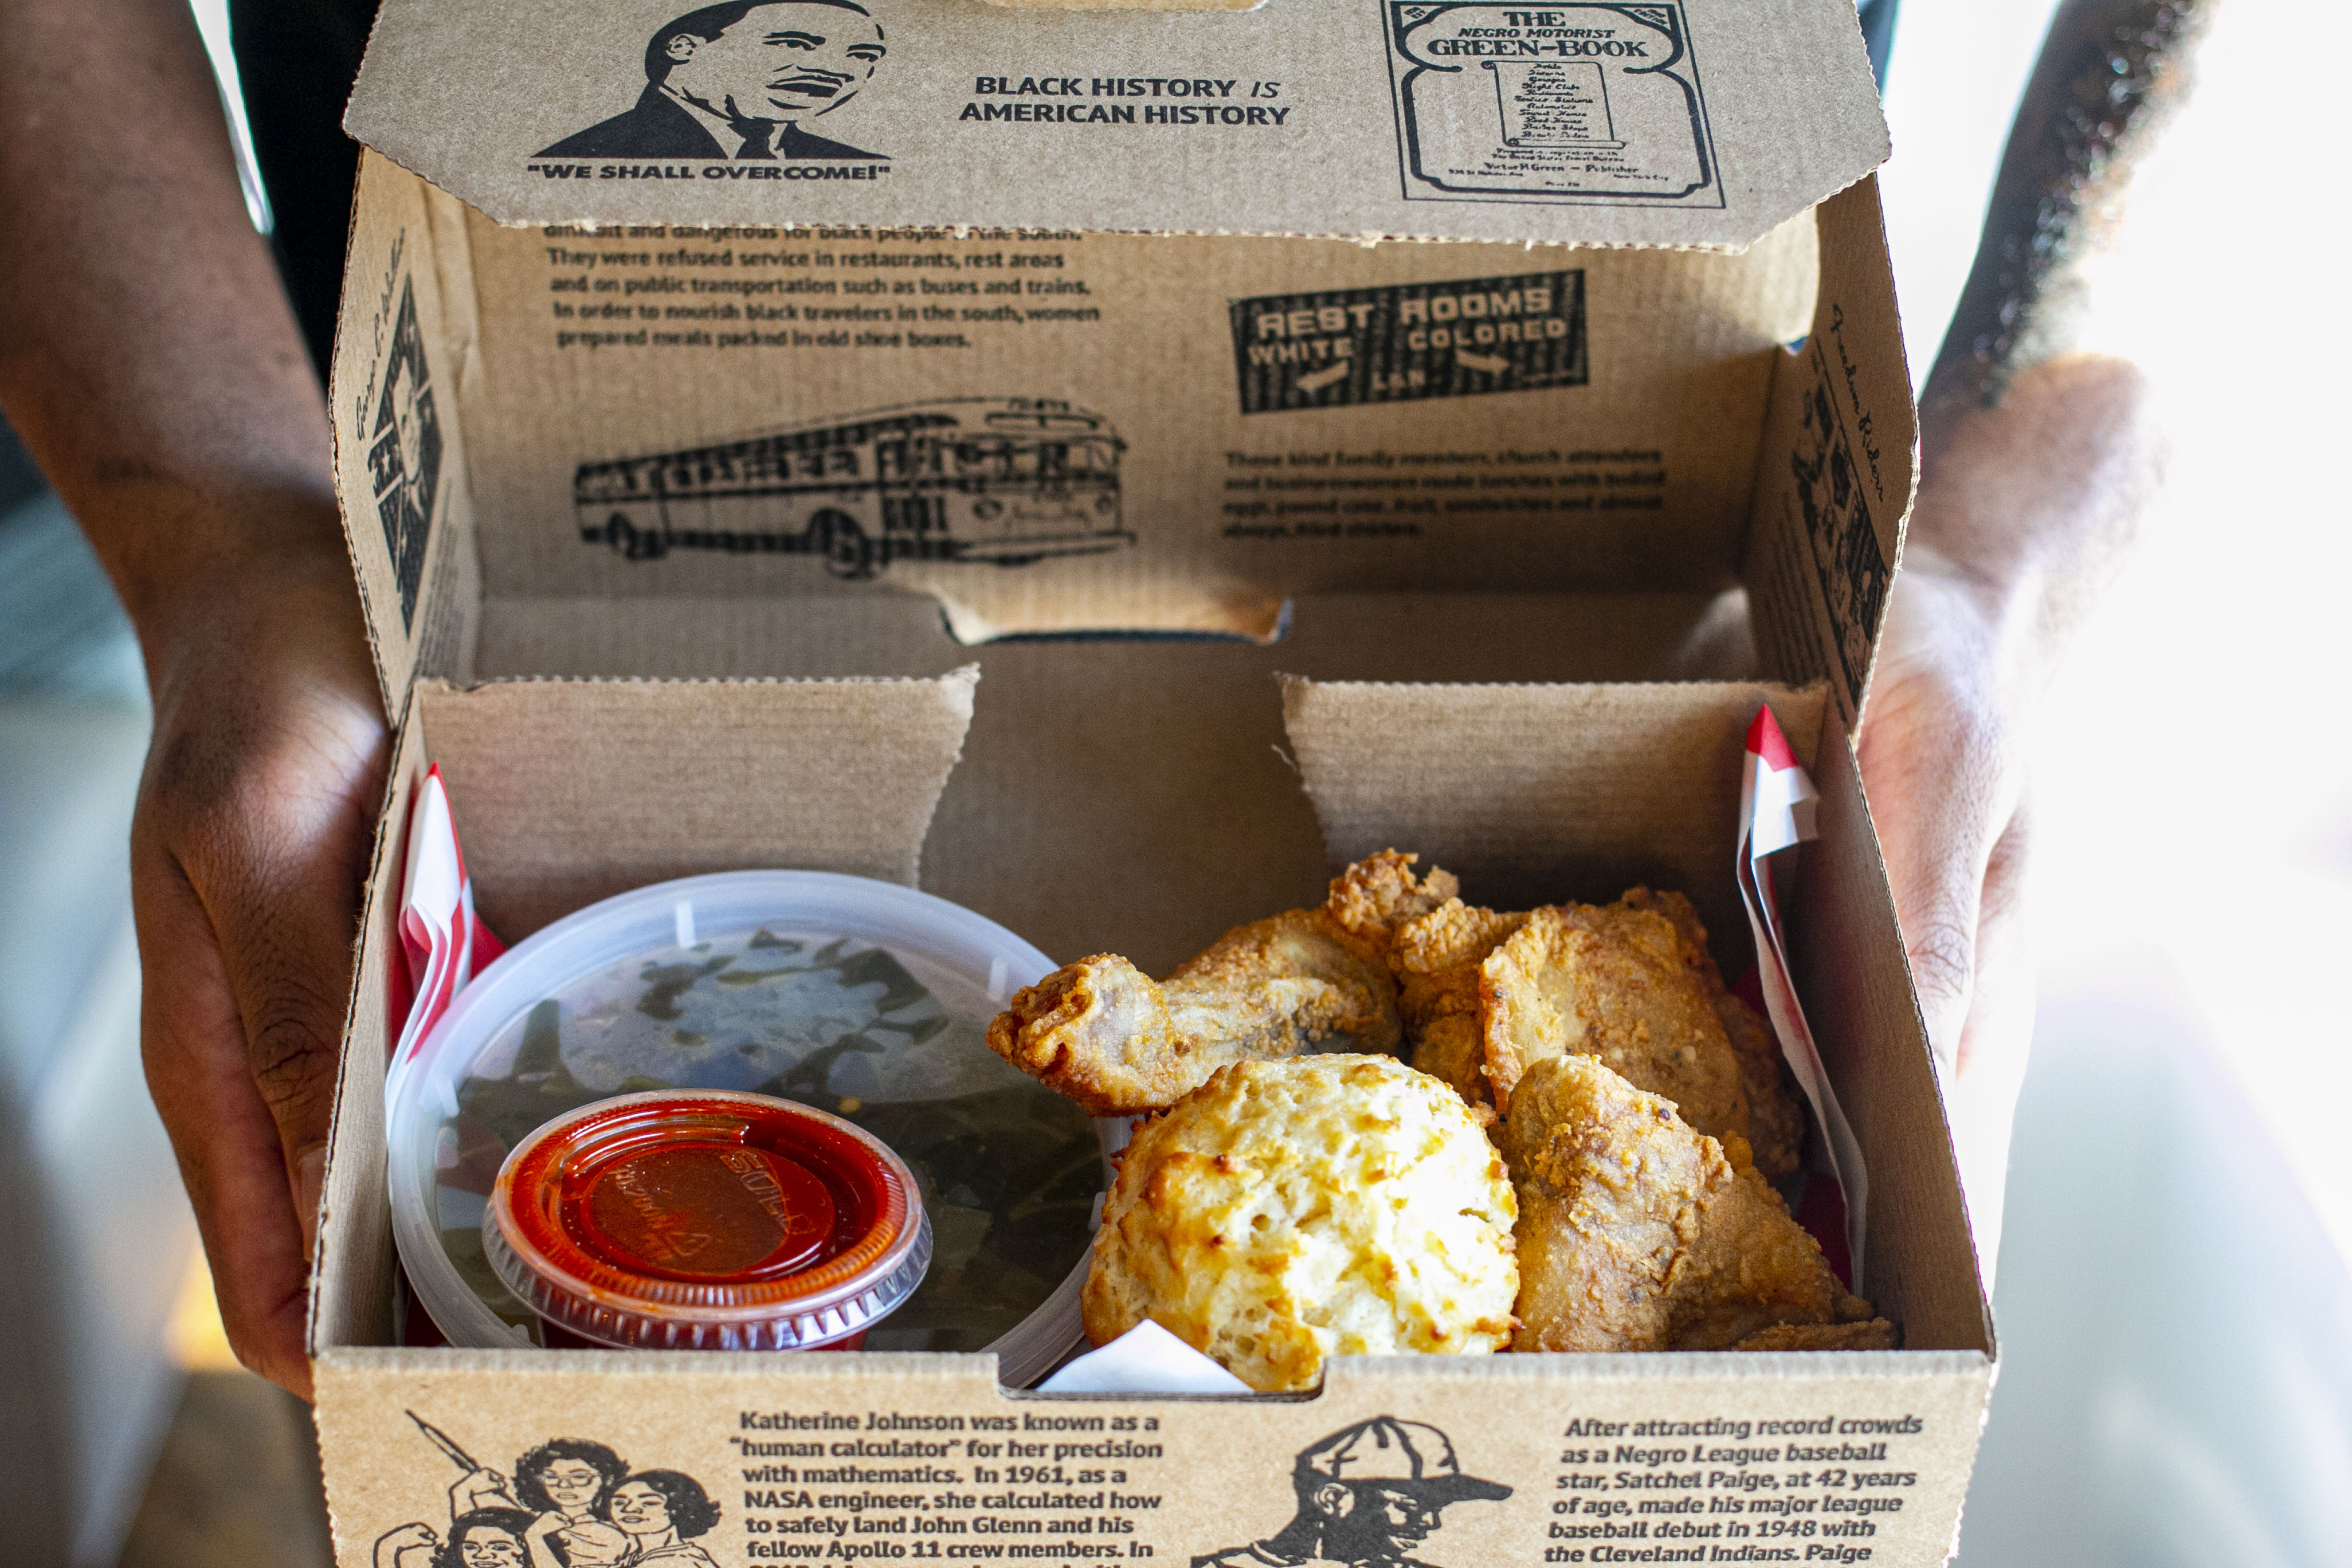 A cardboard box filled with chicken, a biscuit, order side dishes, held by two hands.